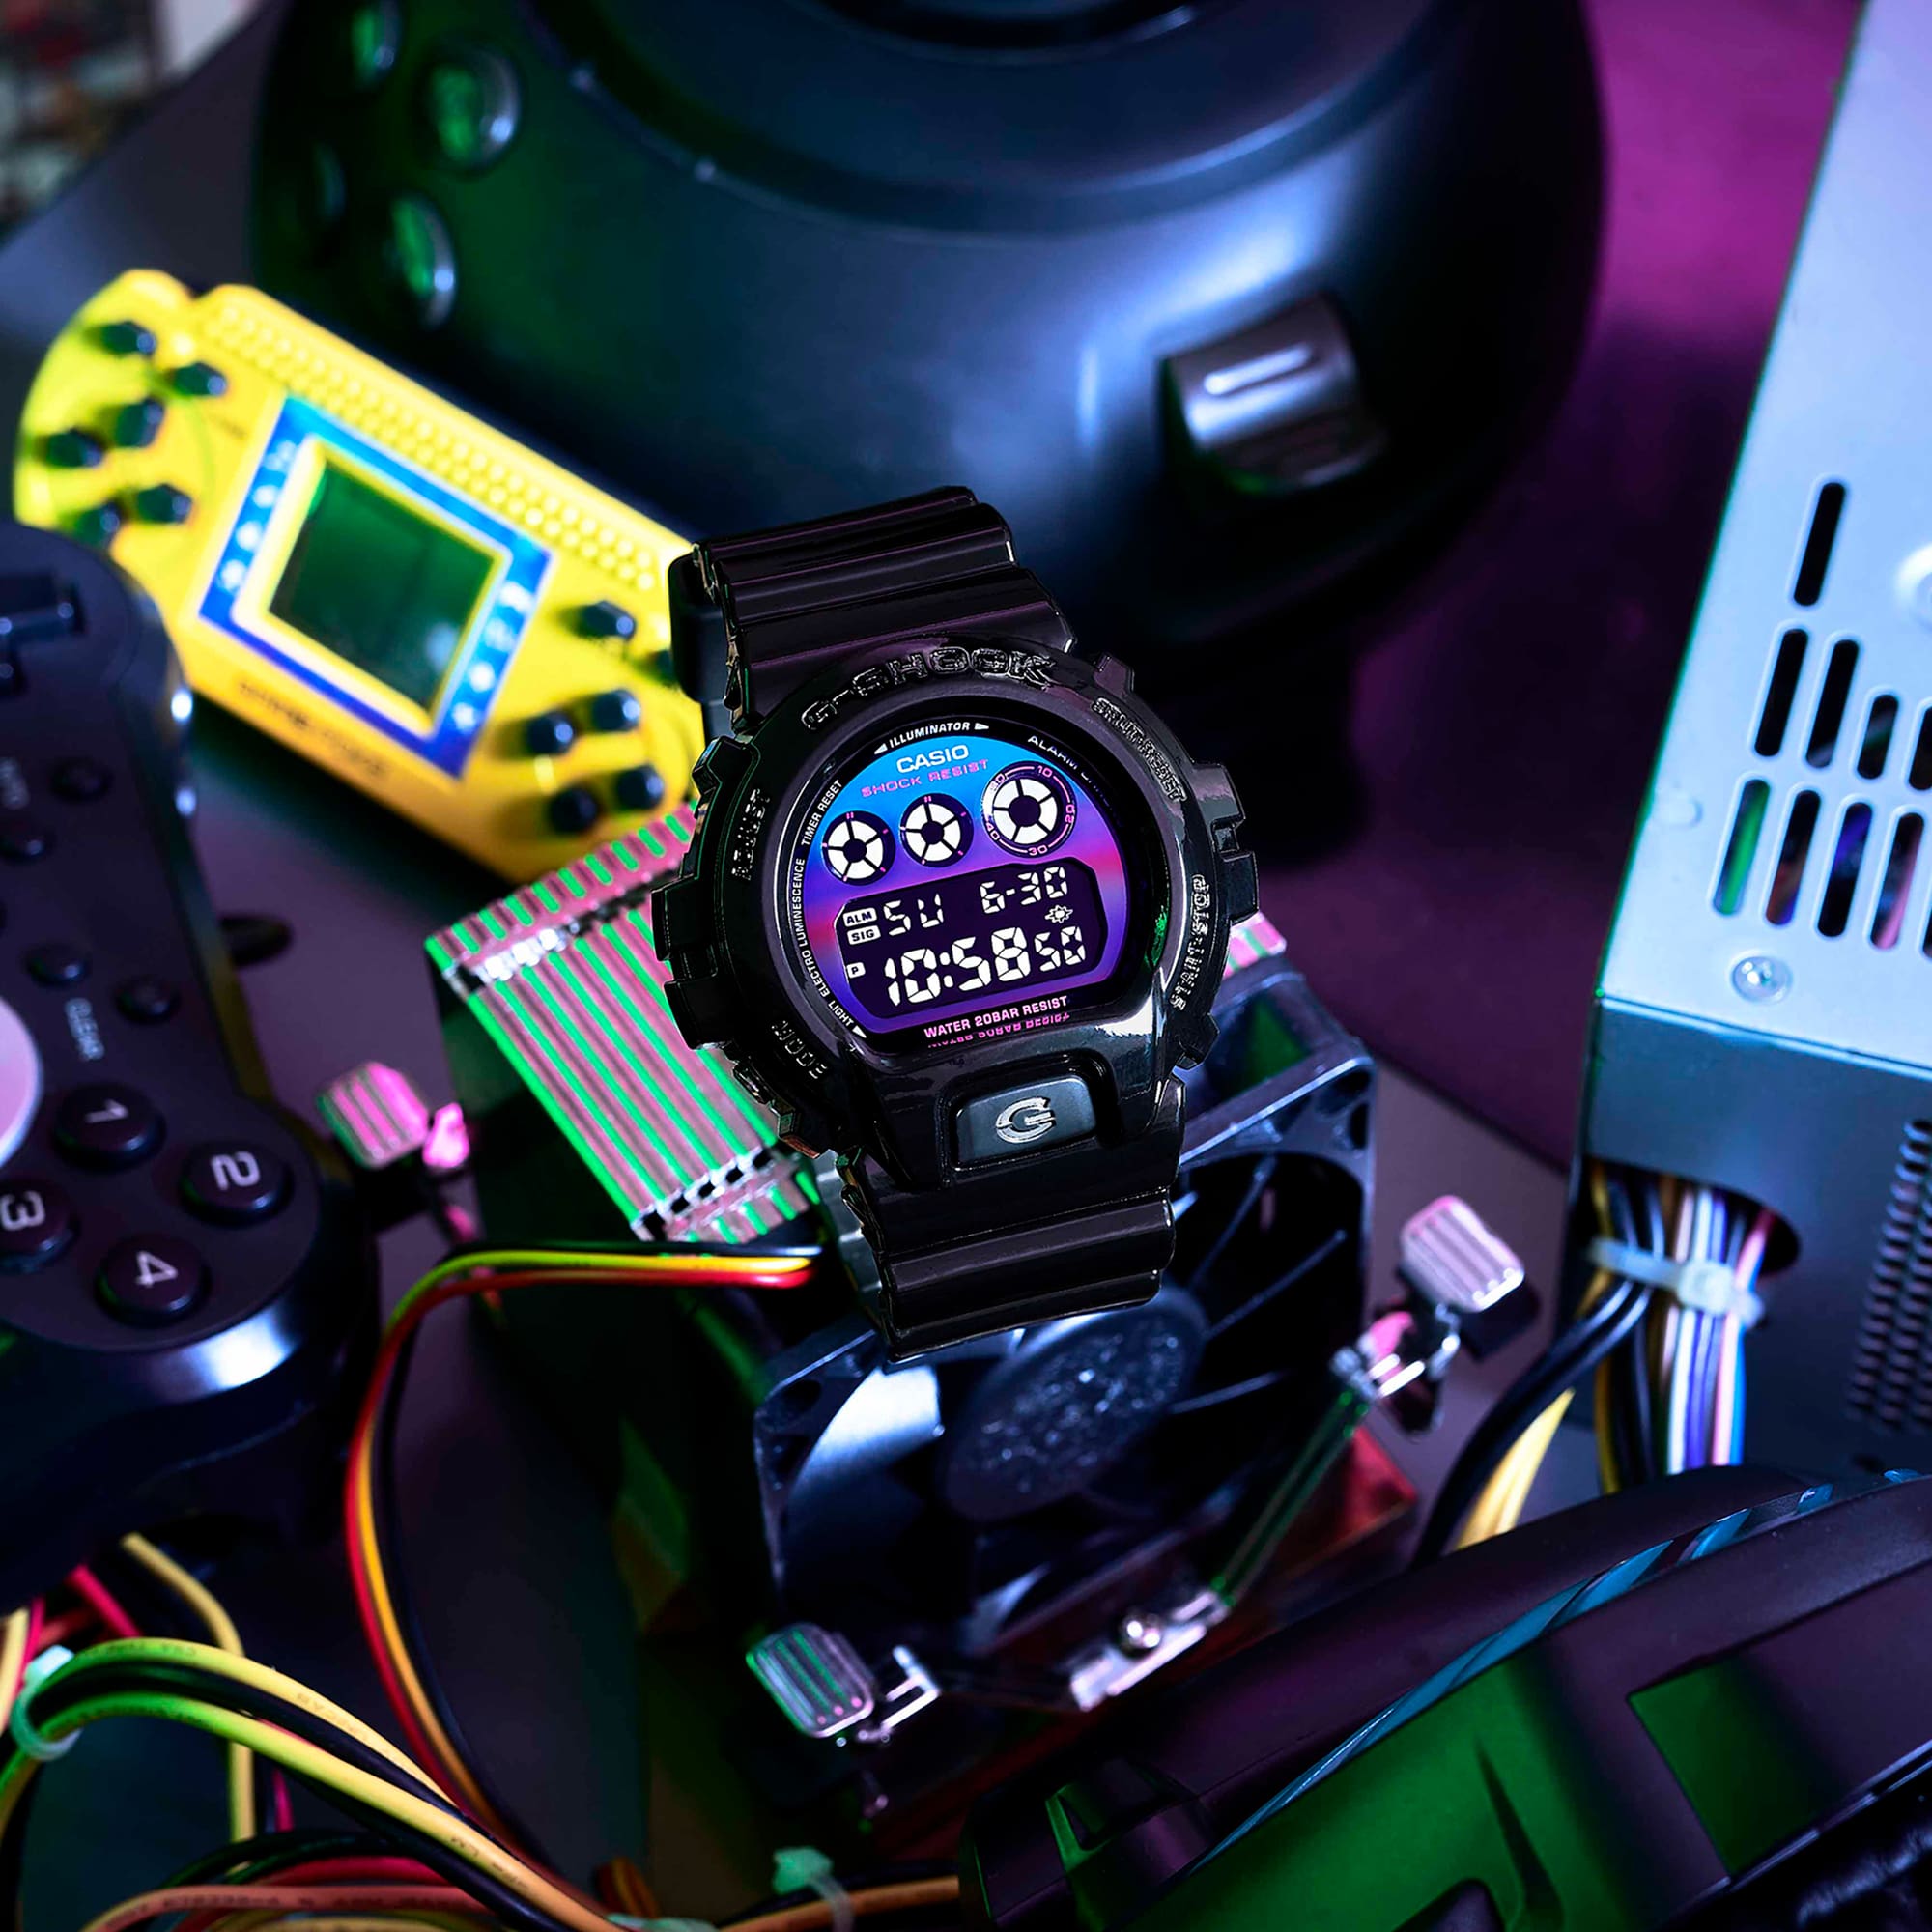 G-SHOCK RGB Gamer watch on a workstation of computer and gaming component